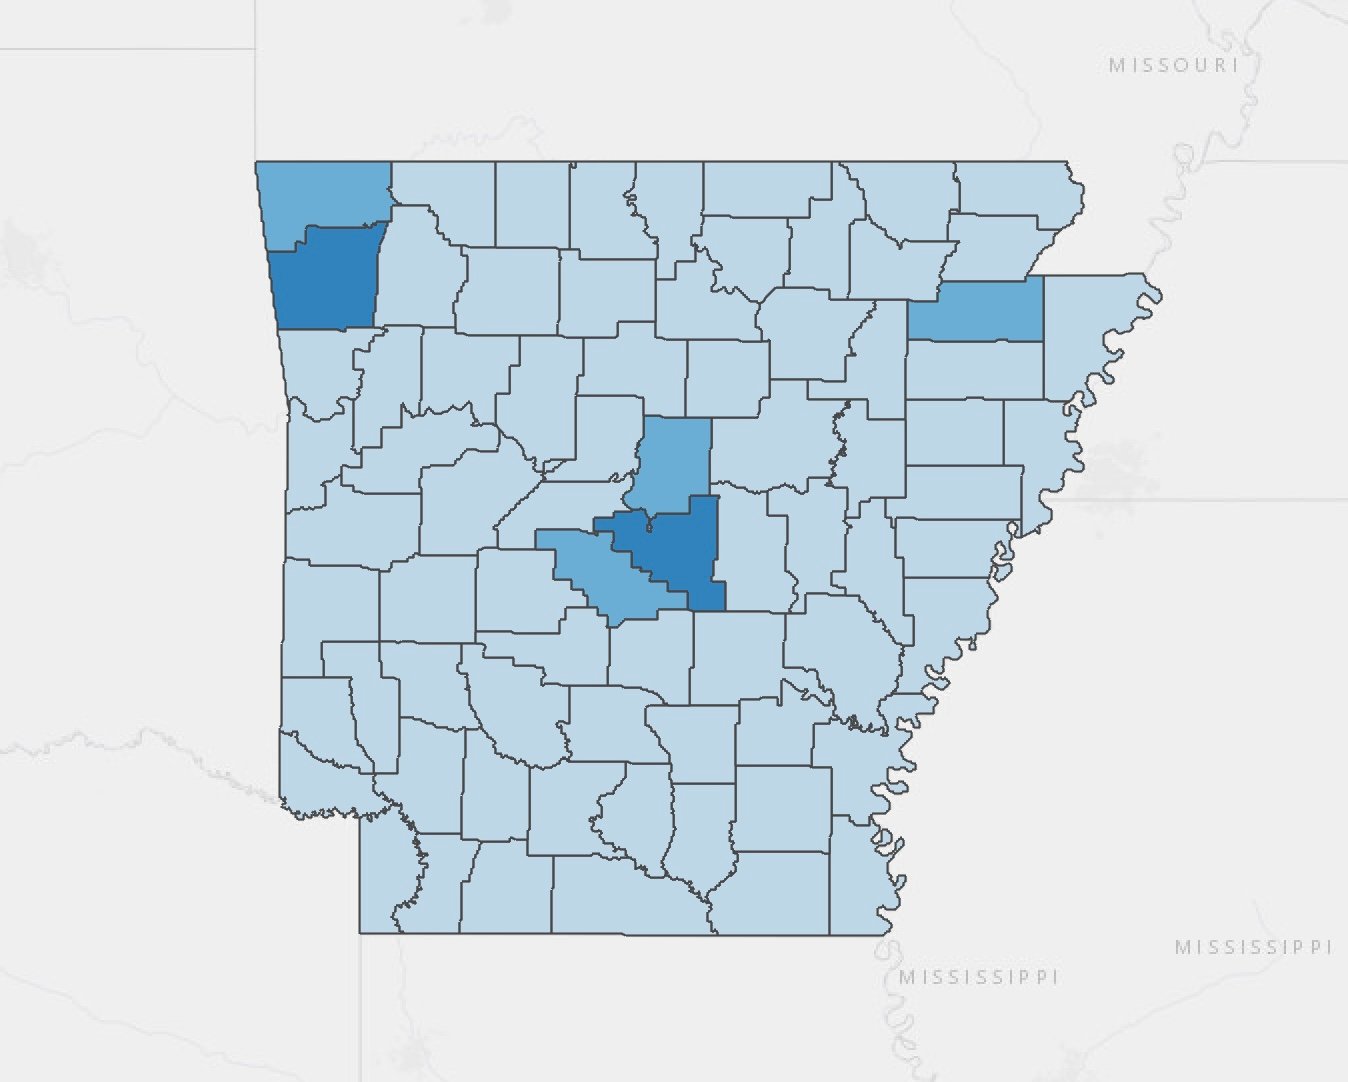 Case update: Arkansas COVID-19 cases increase by 1,782 over past 7 days